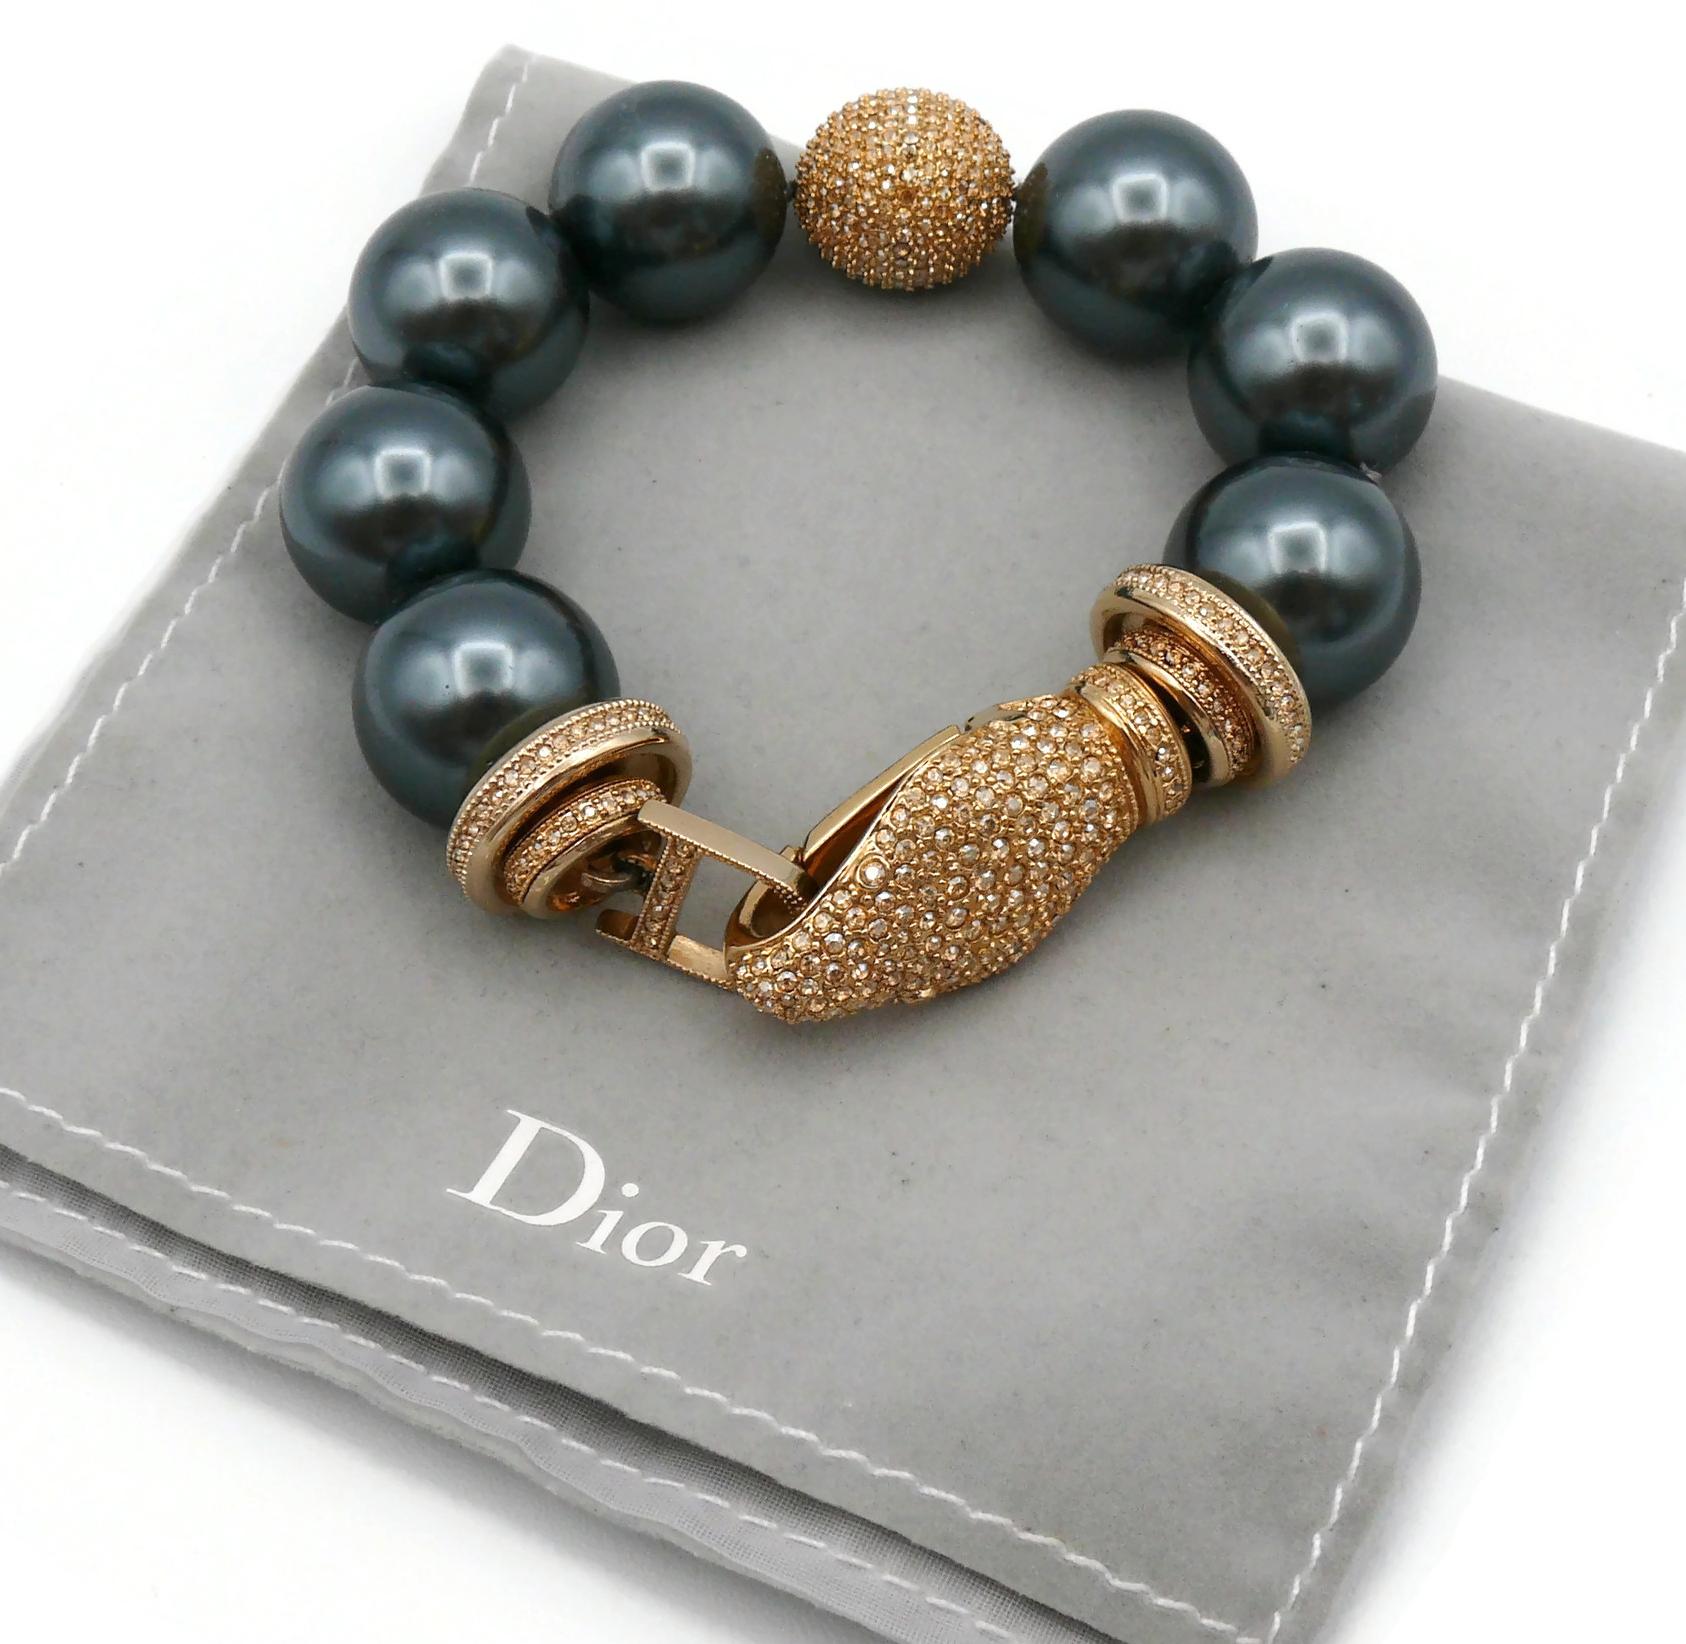 dior bracelet with pearl